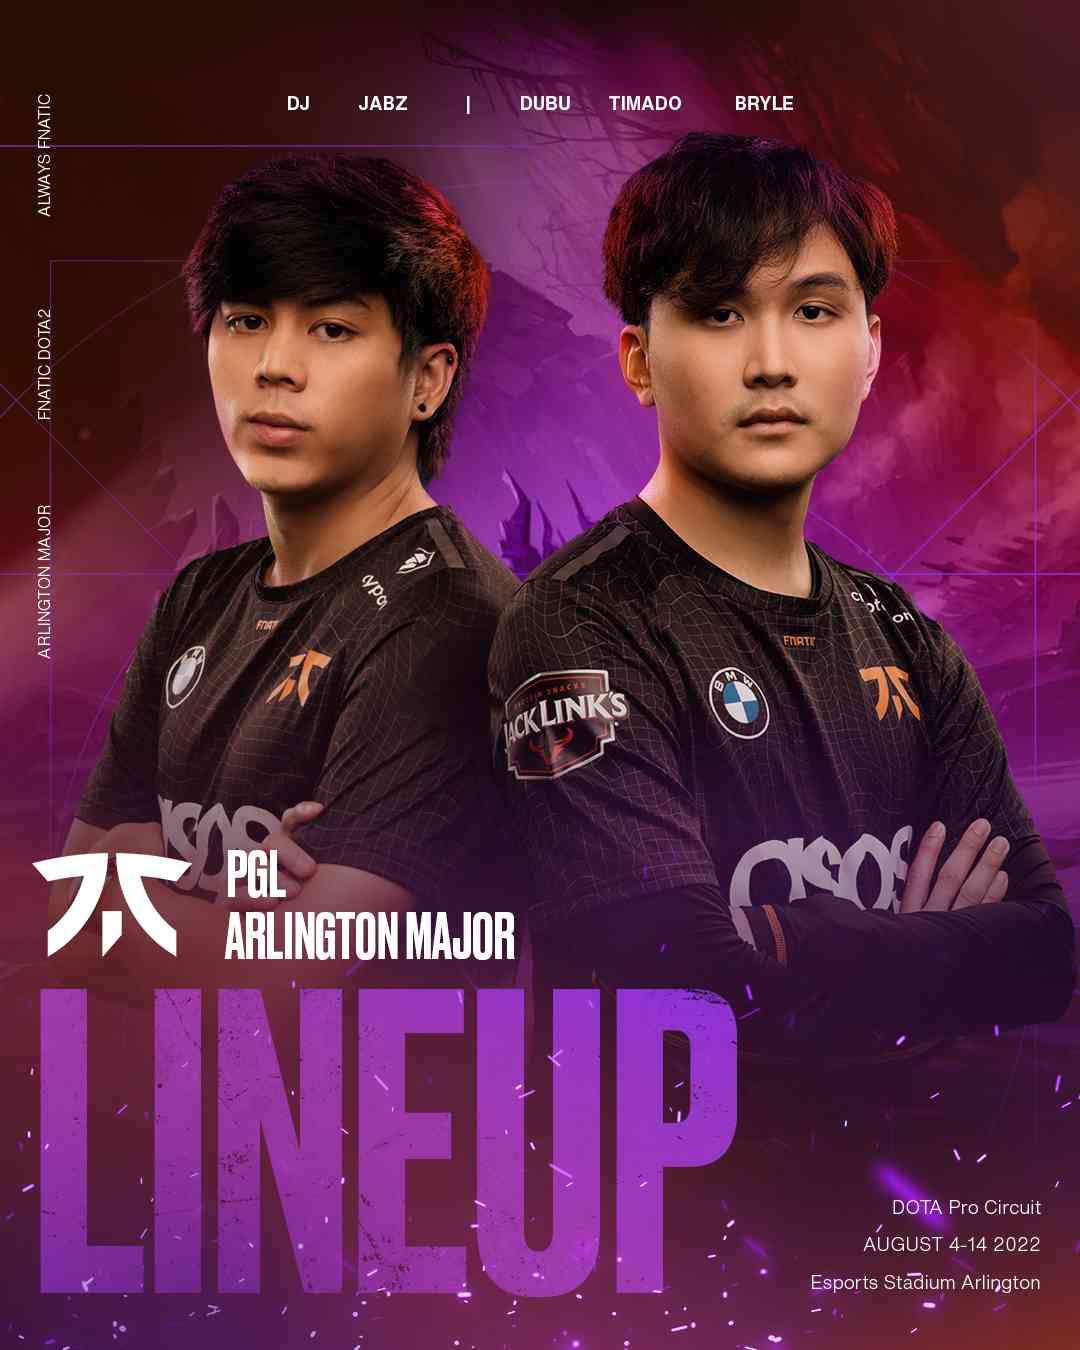 DJ and Jabz stand in their Fnatic jerseys on a graphic announcing the substitutes for the Arlington Major 2022